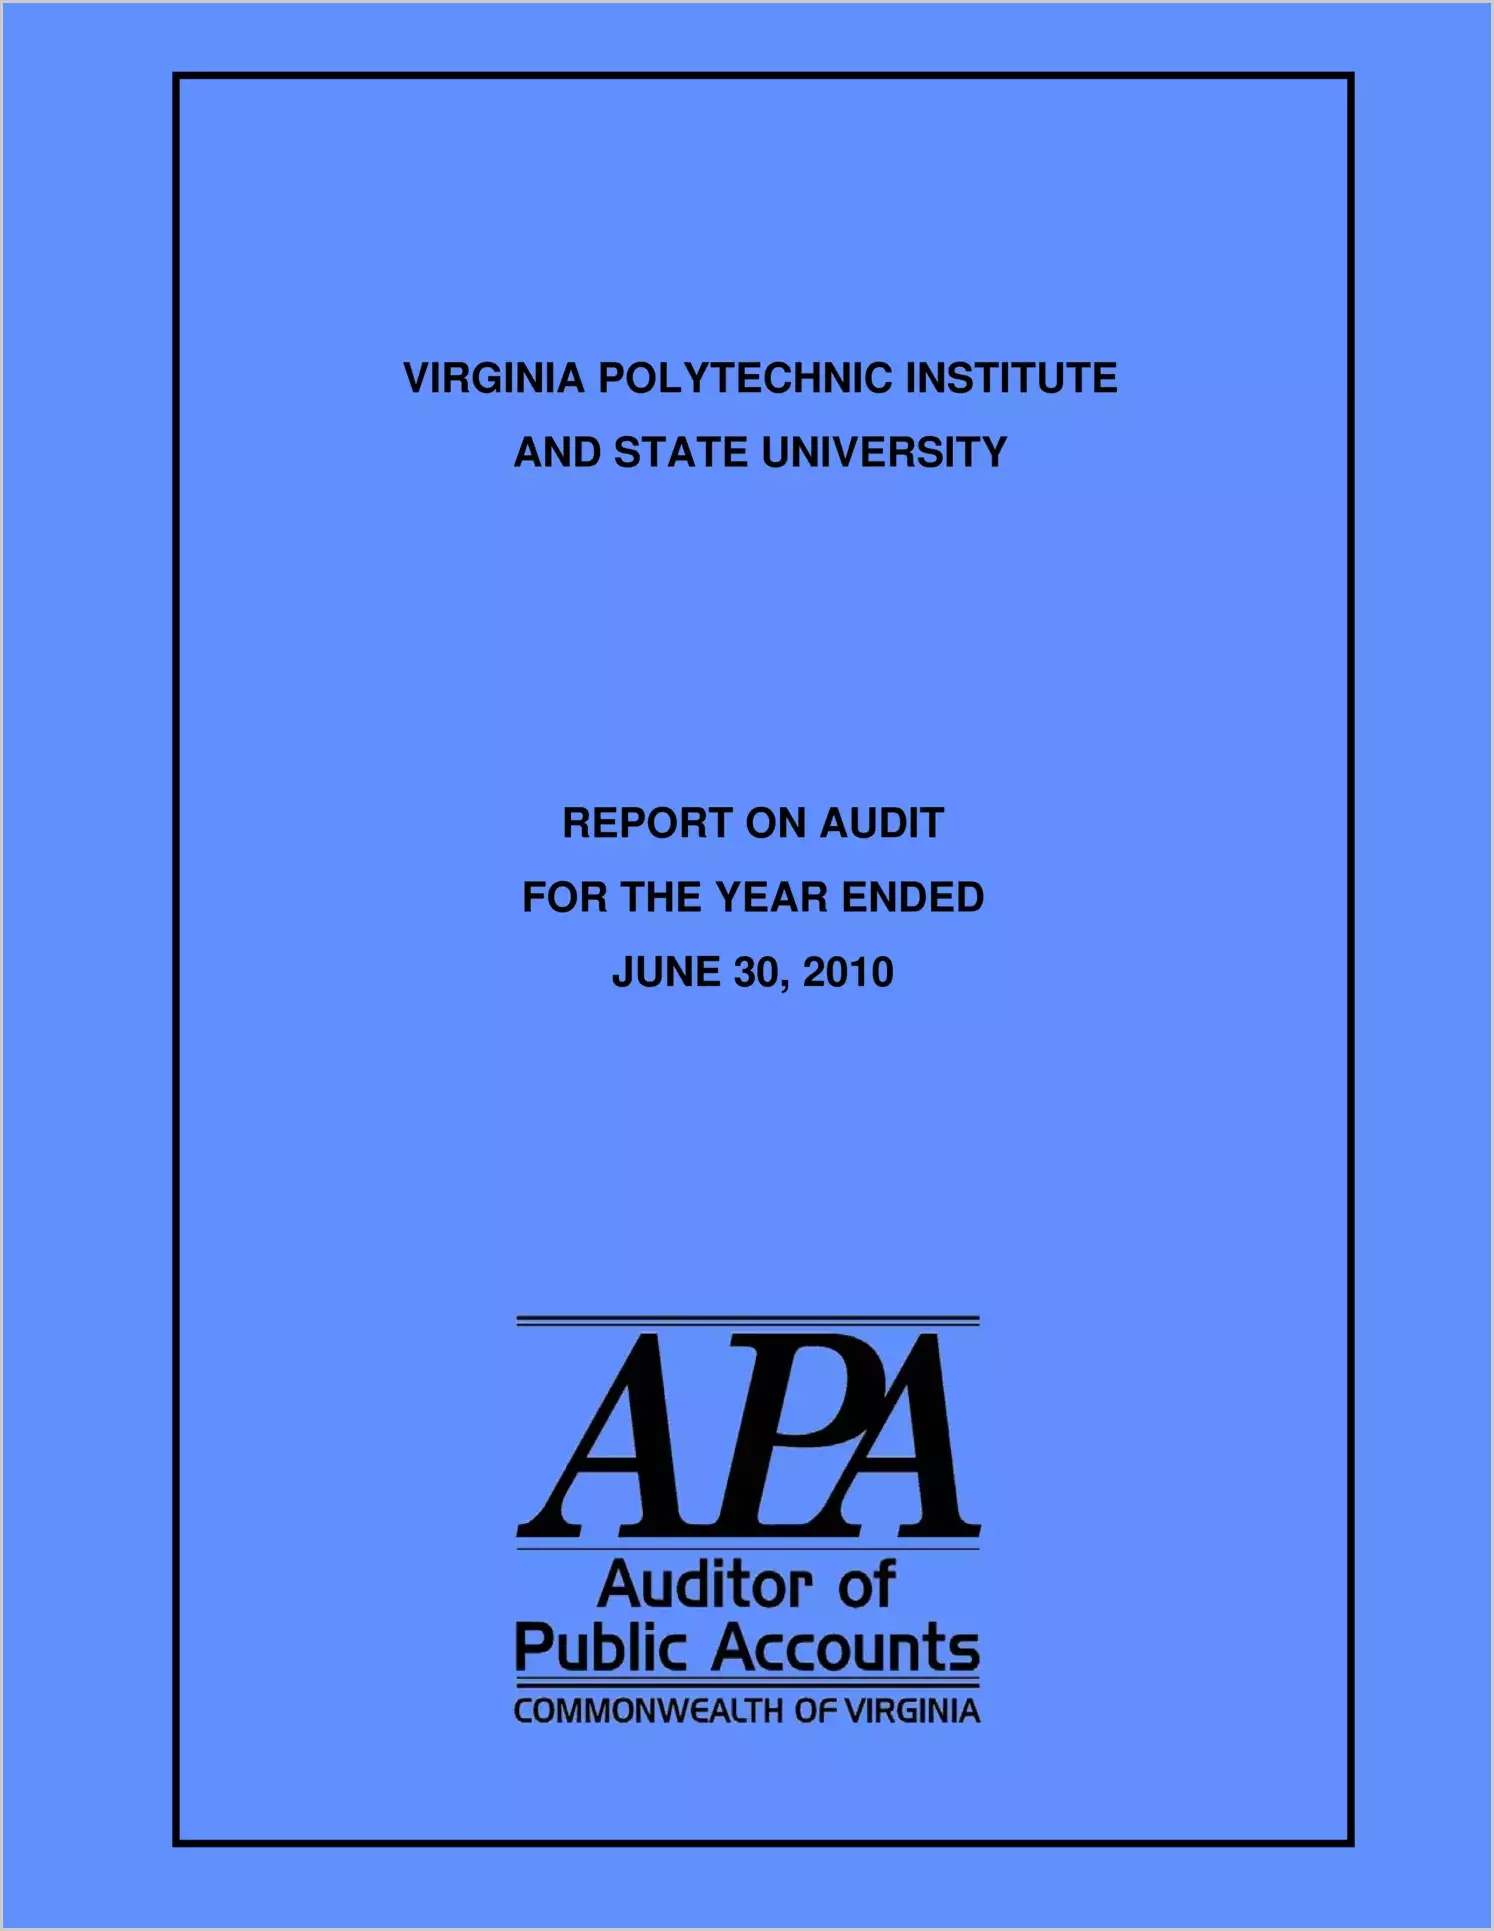 Virginia Polytechnic Institute and State University for the year ended June 30, 2010